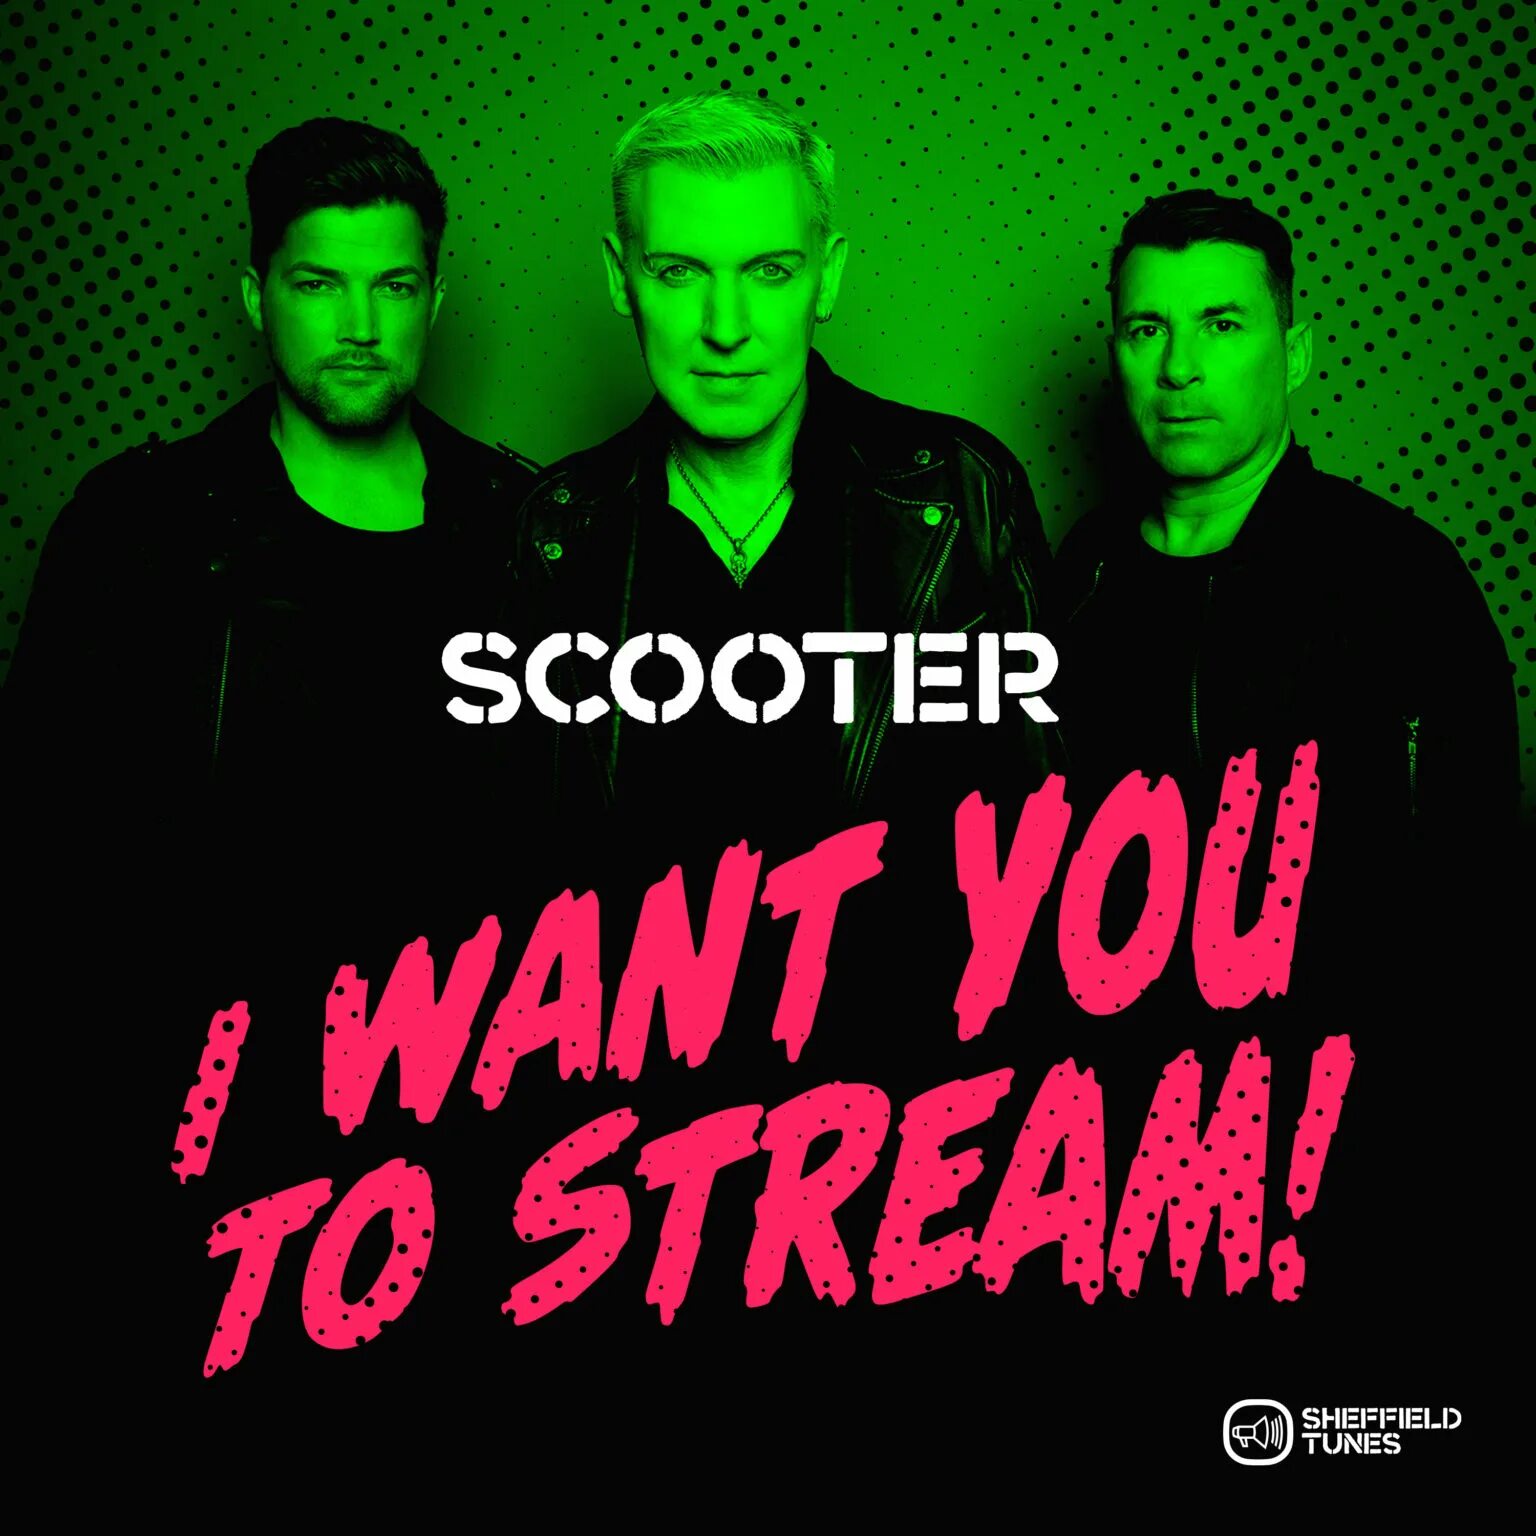 Scooter i keep hearing. Scooter. I want you to Stream! Scooter. Scooter синглы. Scooter обложки альбомов.